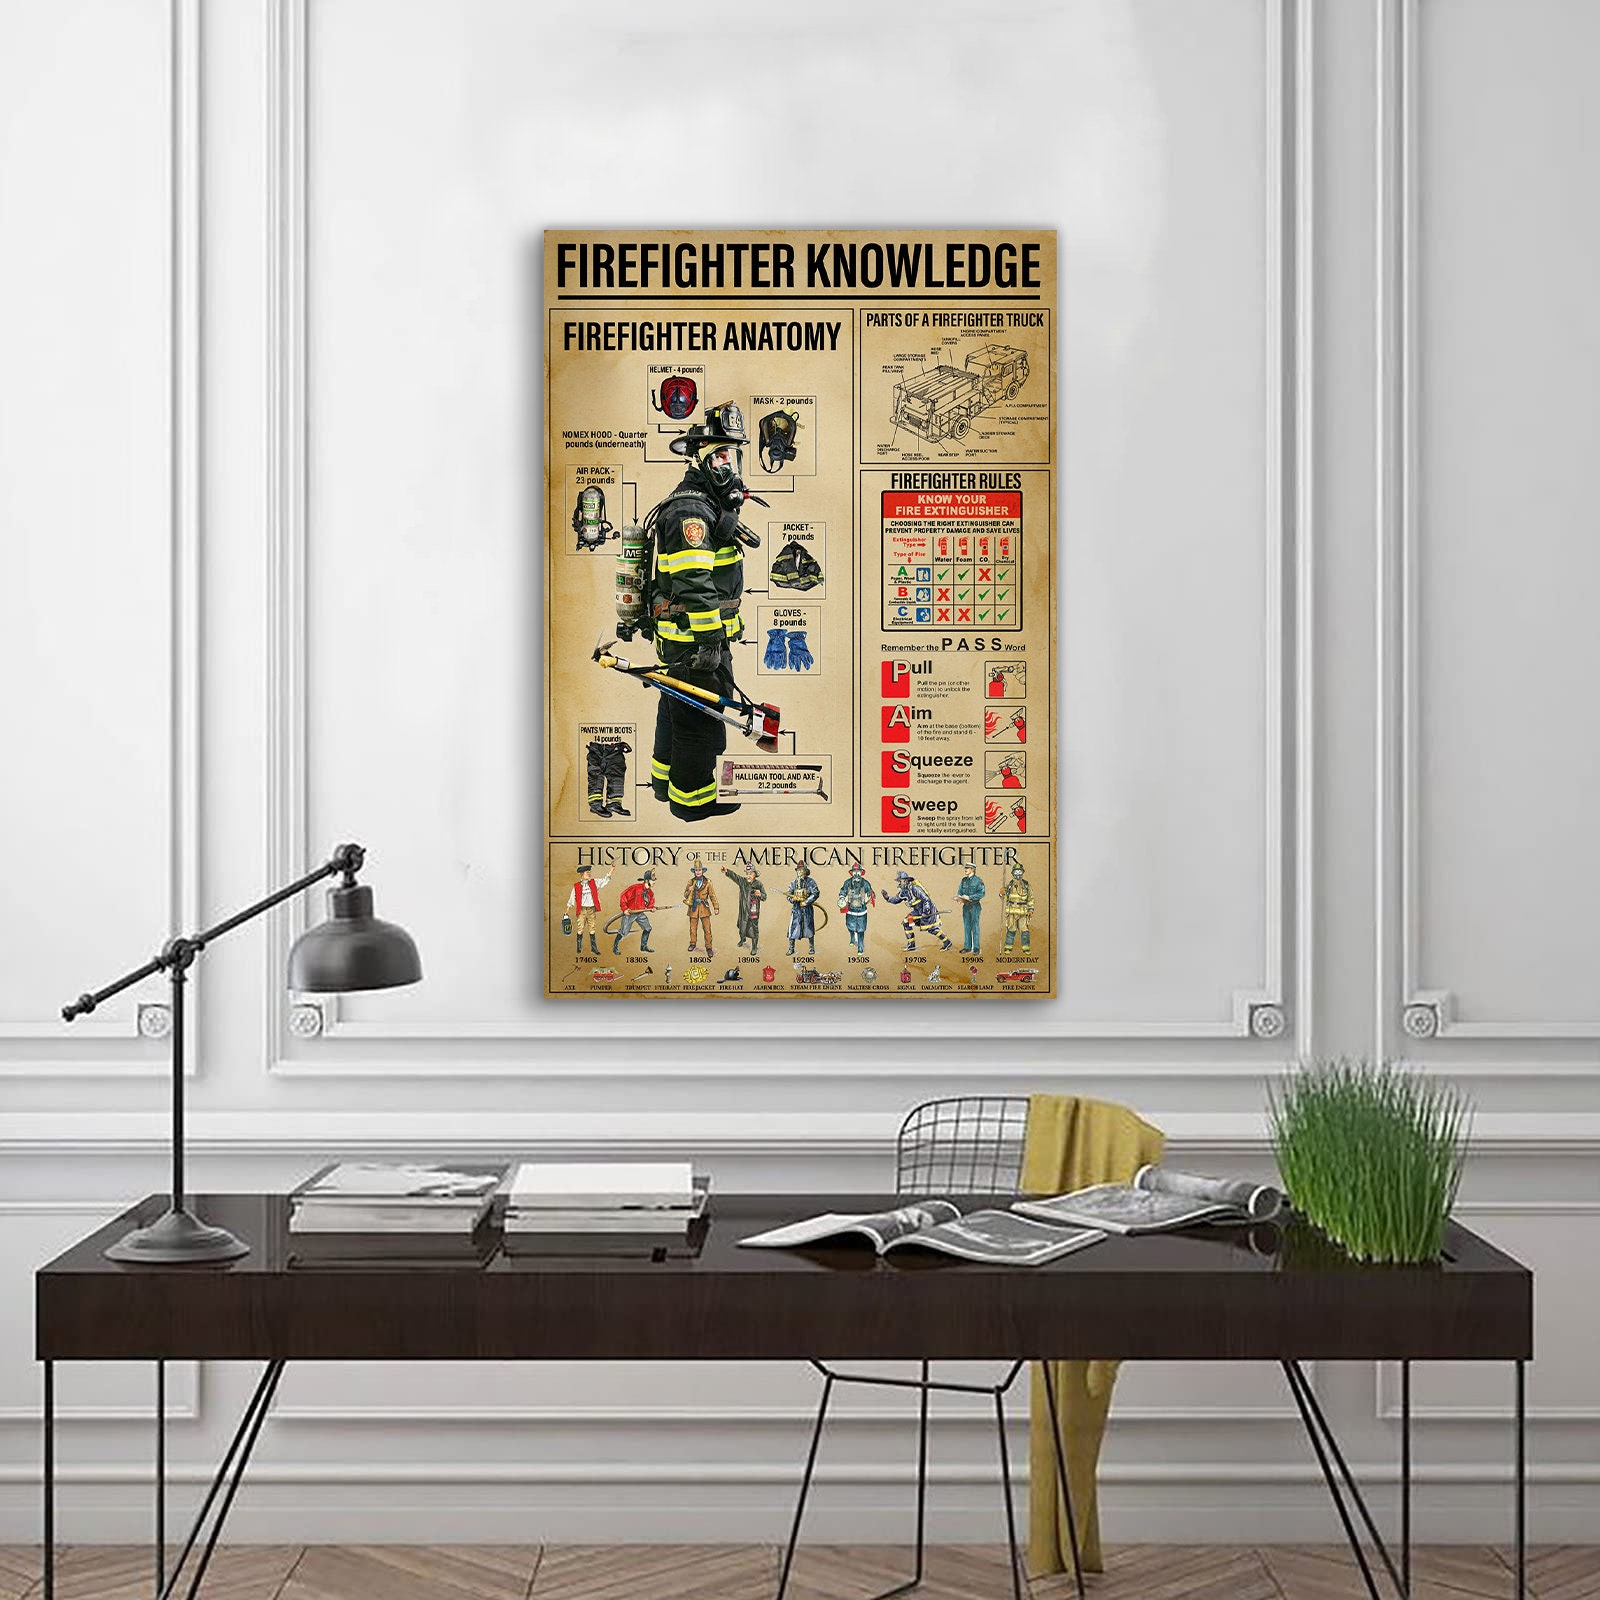 Discover Firefighter Knowledge Poster, Knowledge Poster, Vintage Poster Wall Art, Home Decor, Firefighter Rules, Firefighter Gift, Firefighter Poster